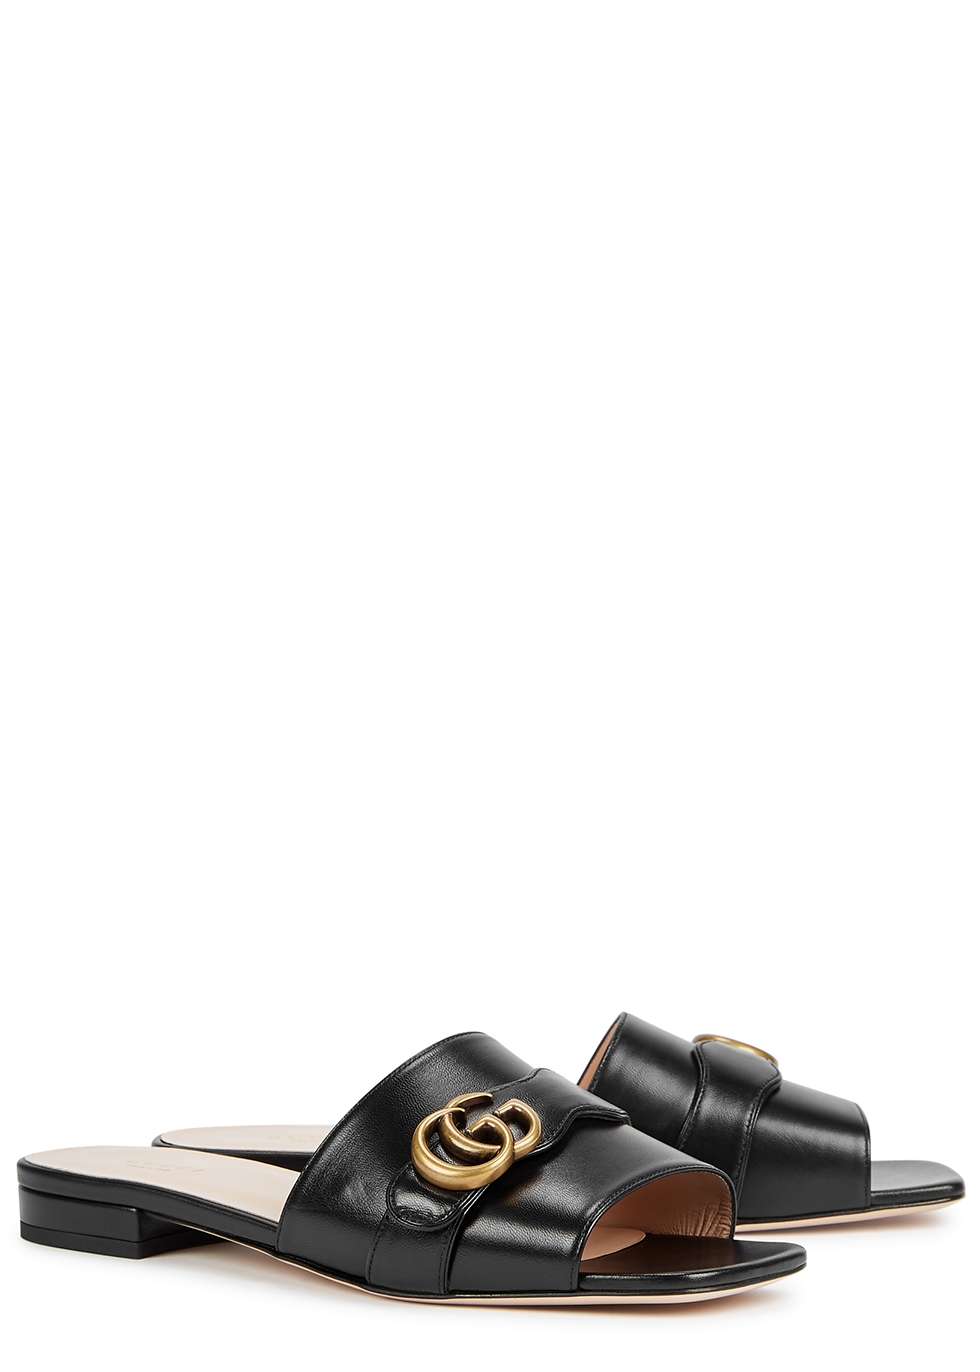 gucci mules marmont